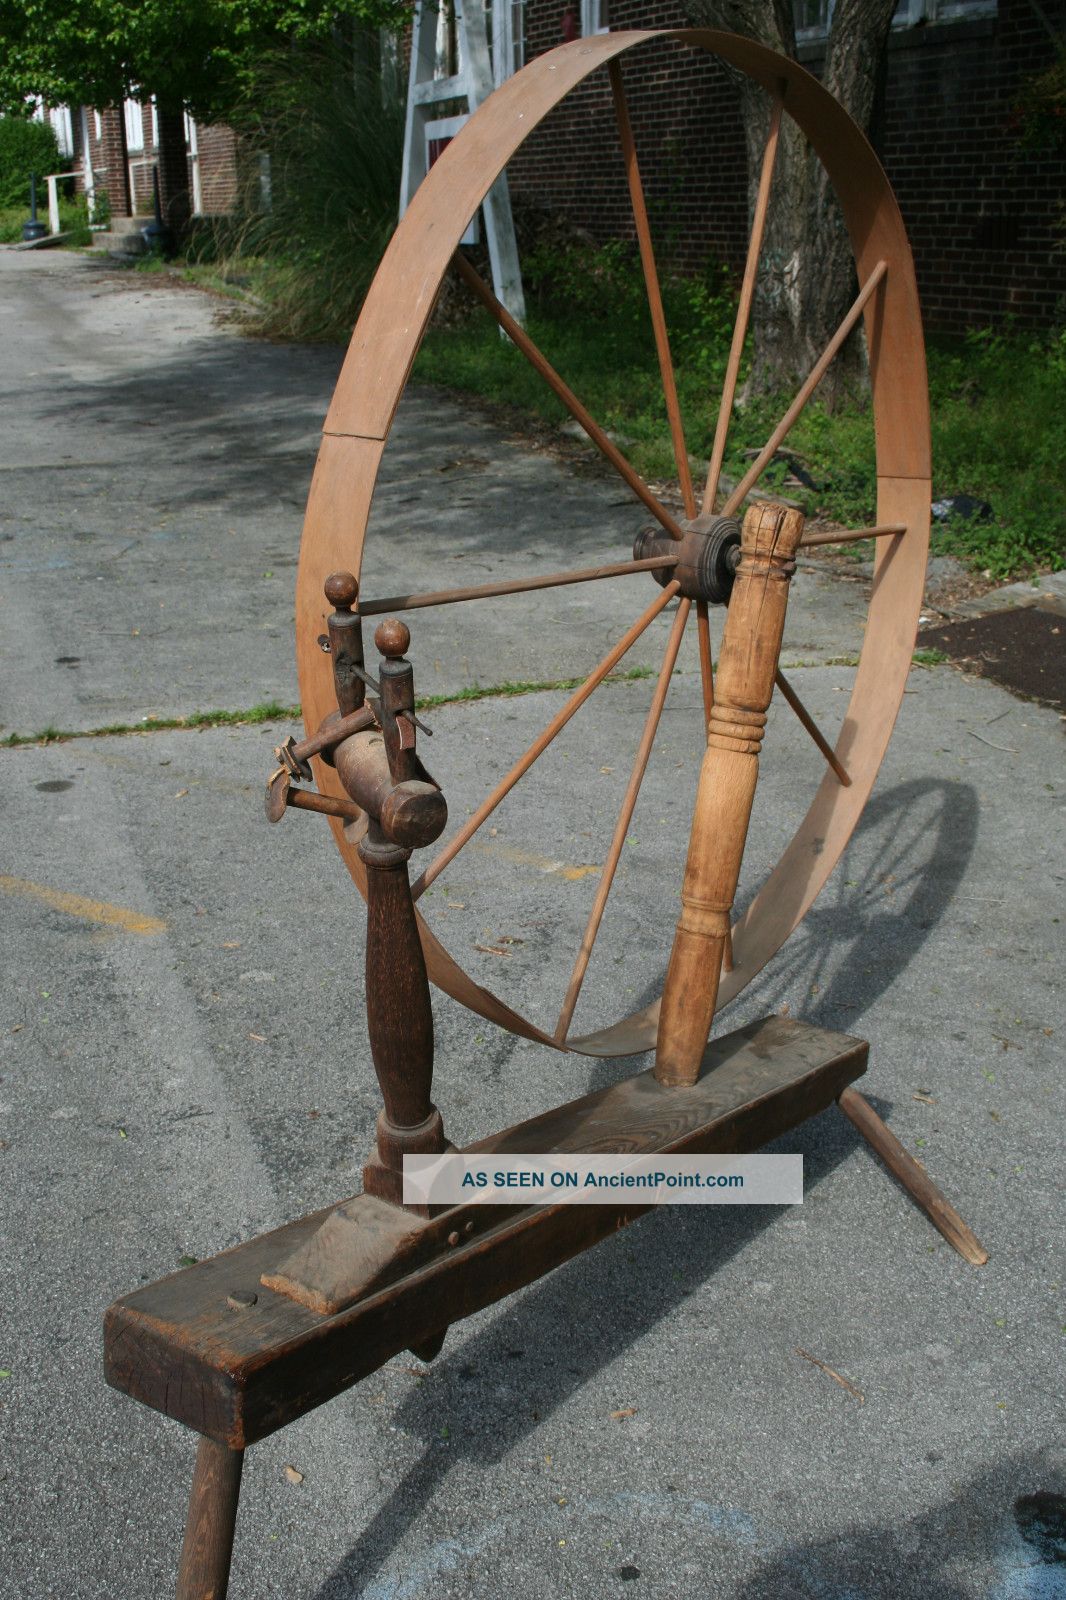 Antique Primitive Late 1700s Great Spindle Spinning Wheel 5 ' Tall Early America Pre-1800 photo